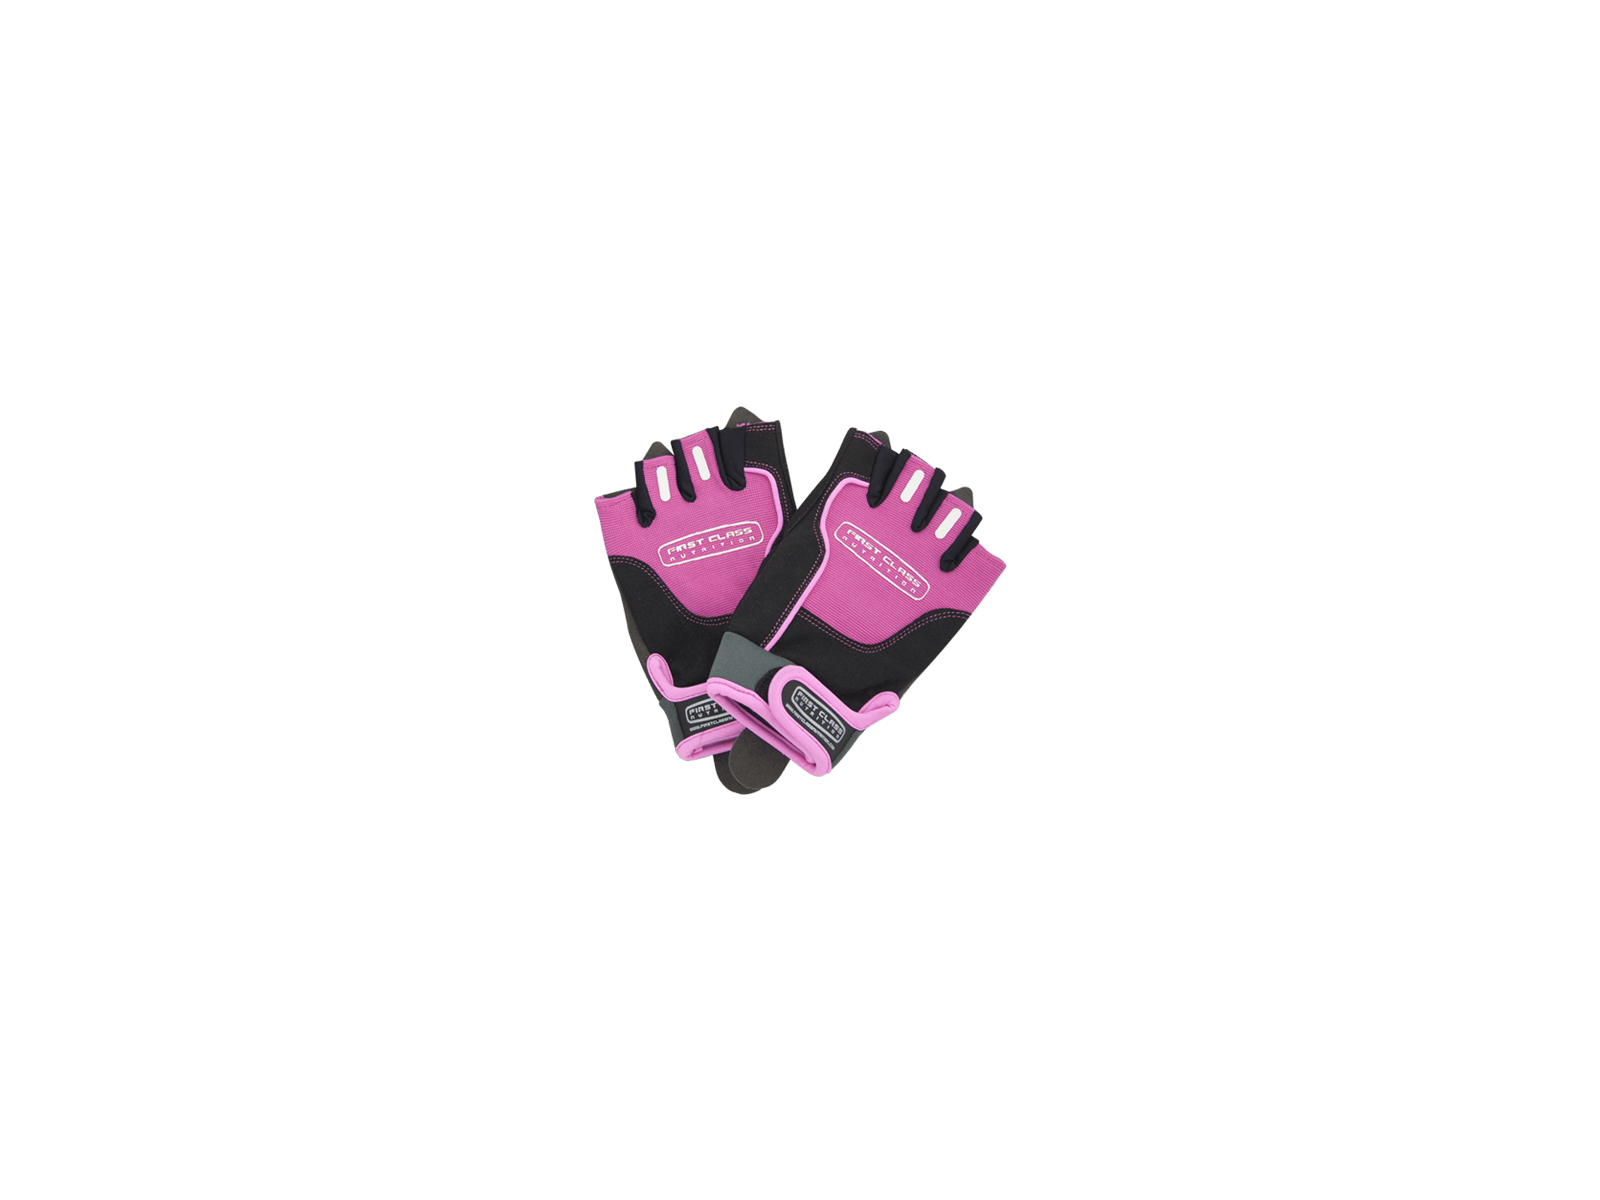 Gloves (M - Pink) - FIRST CLASS NUTRITION